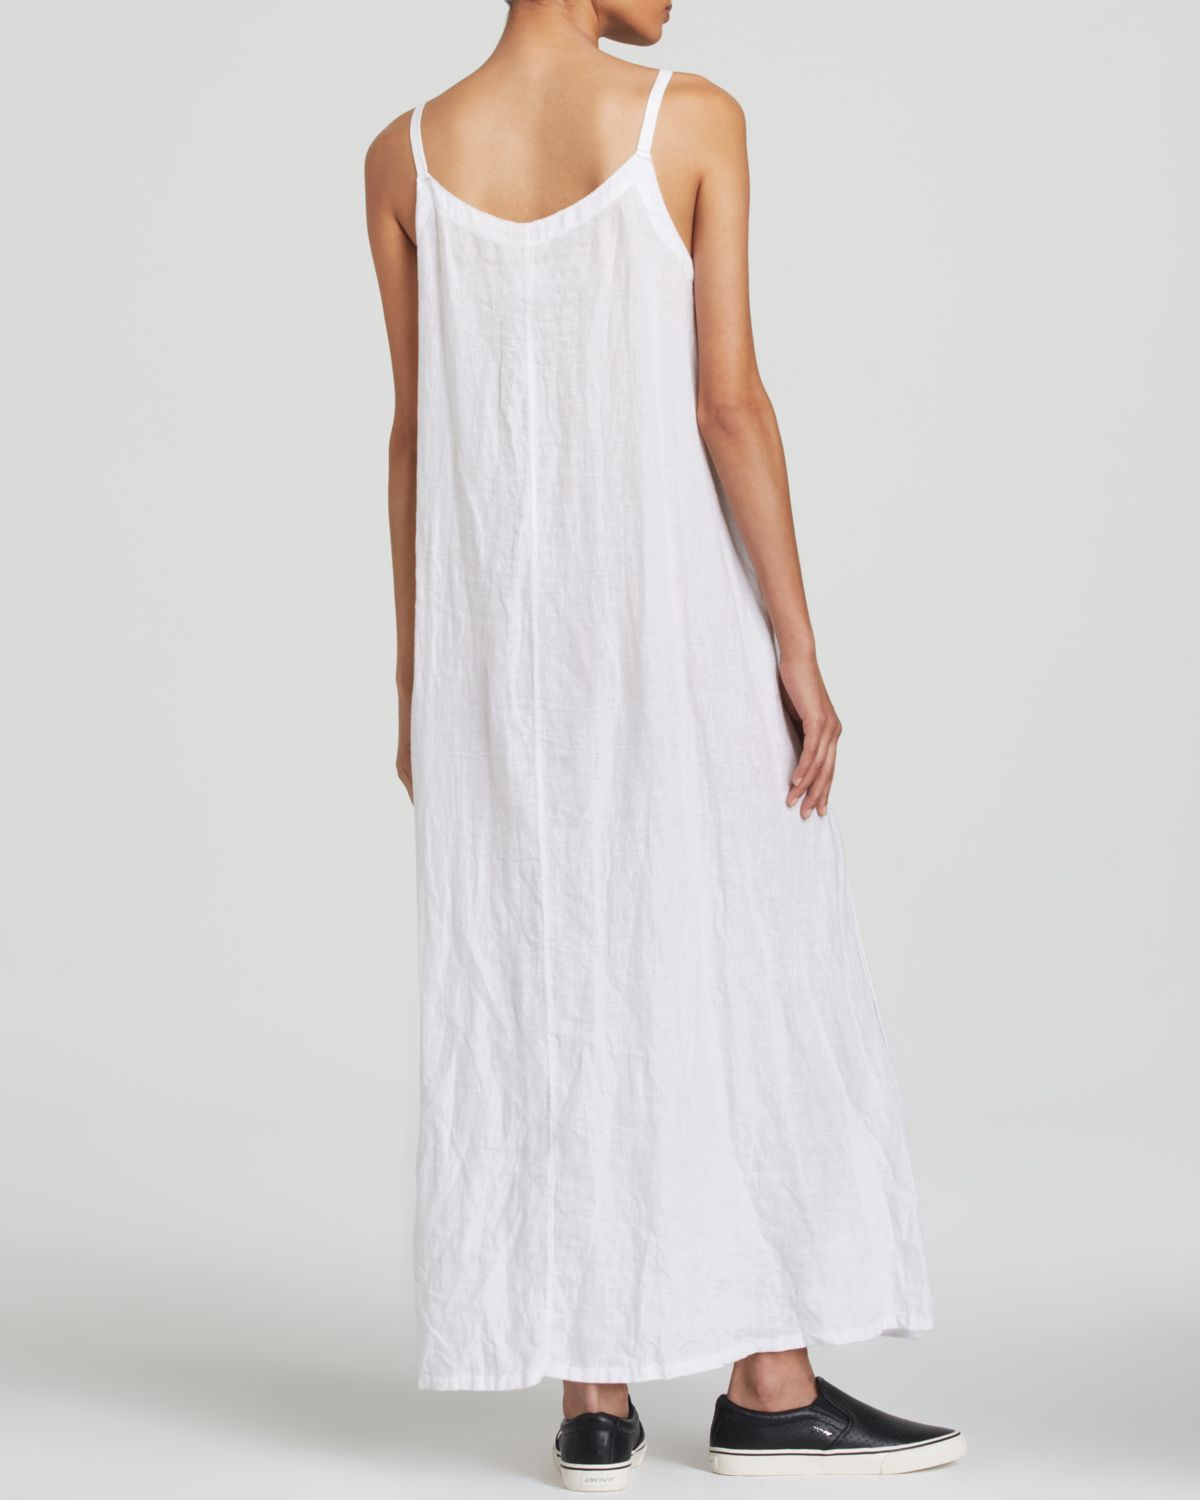 Lyst - Dkny Pure Linen Maxi Dress in White